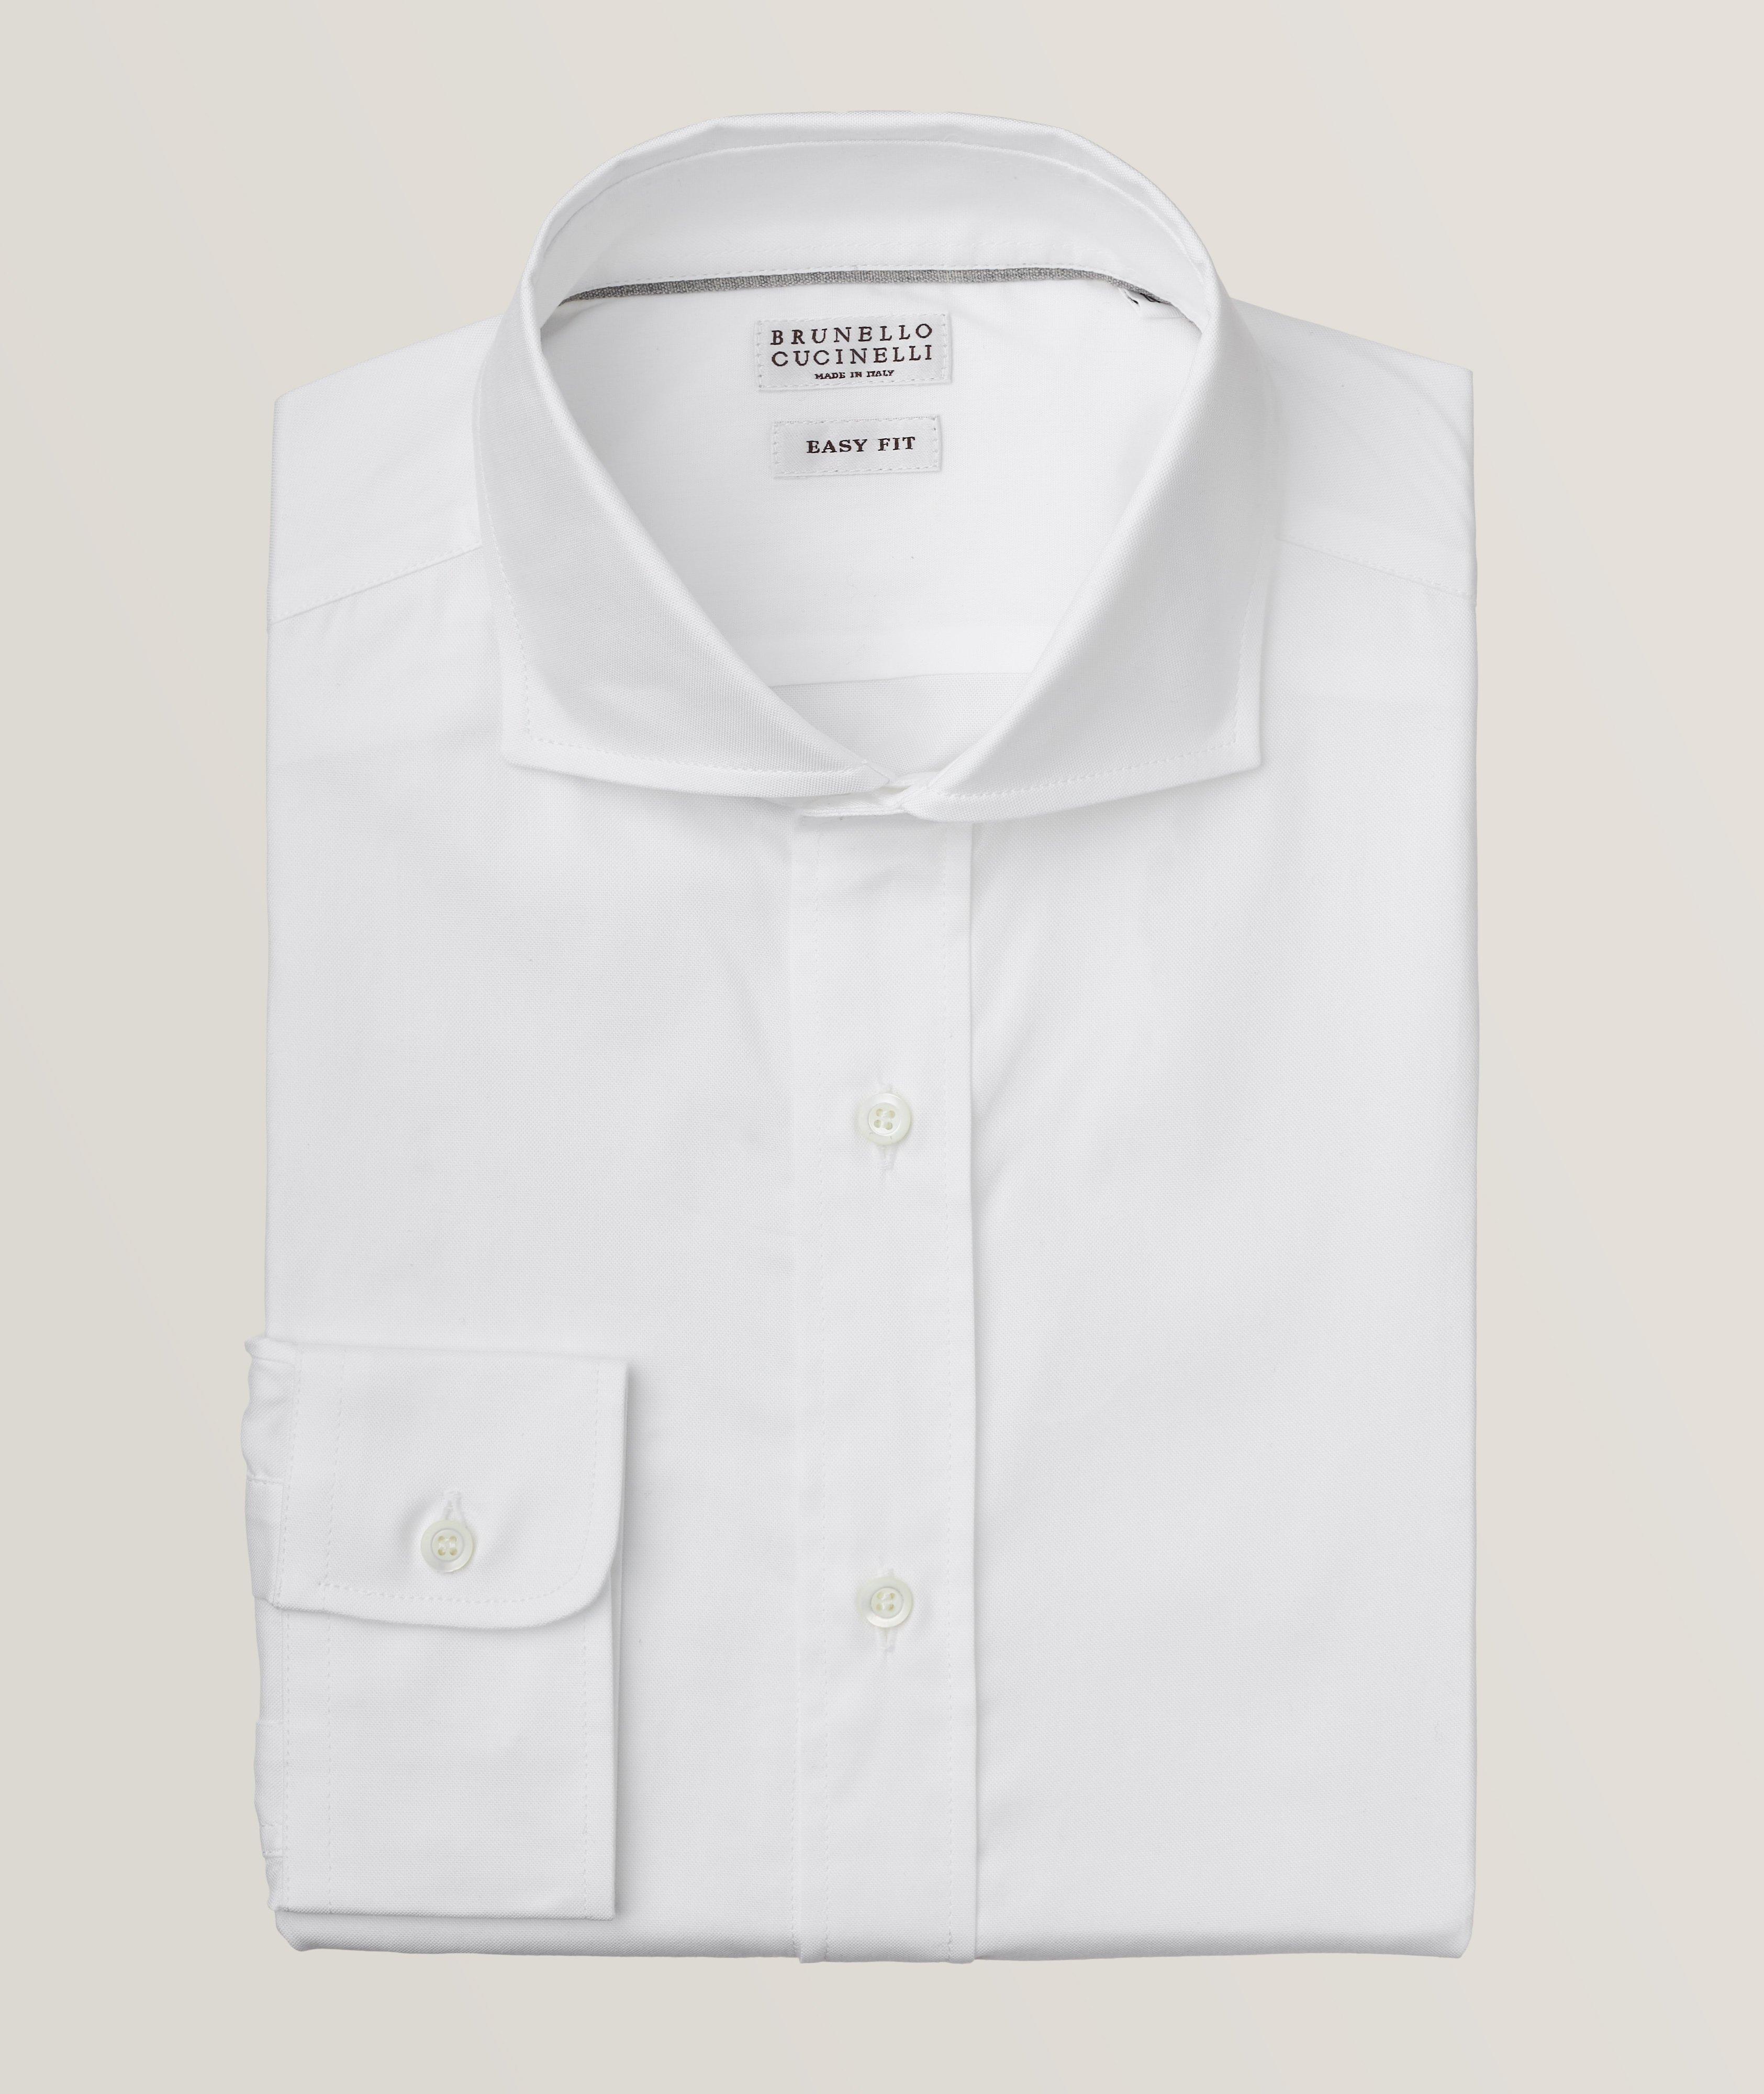 Easy-Fit Cotton Oxford Shirt image 0